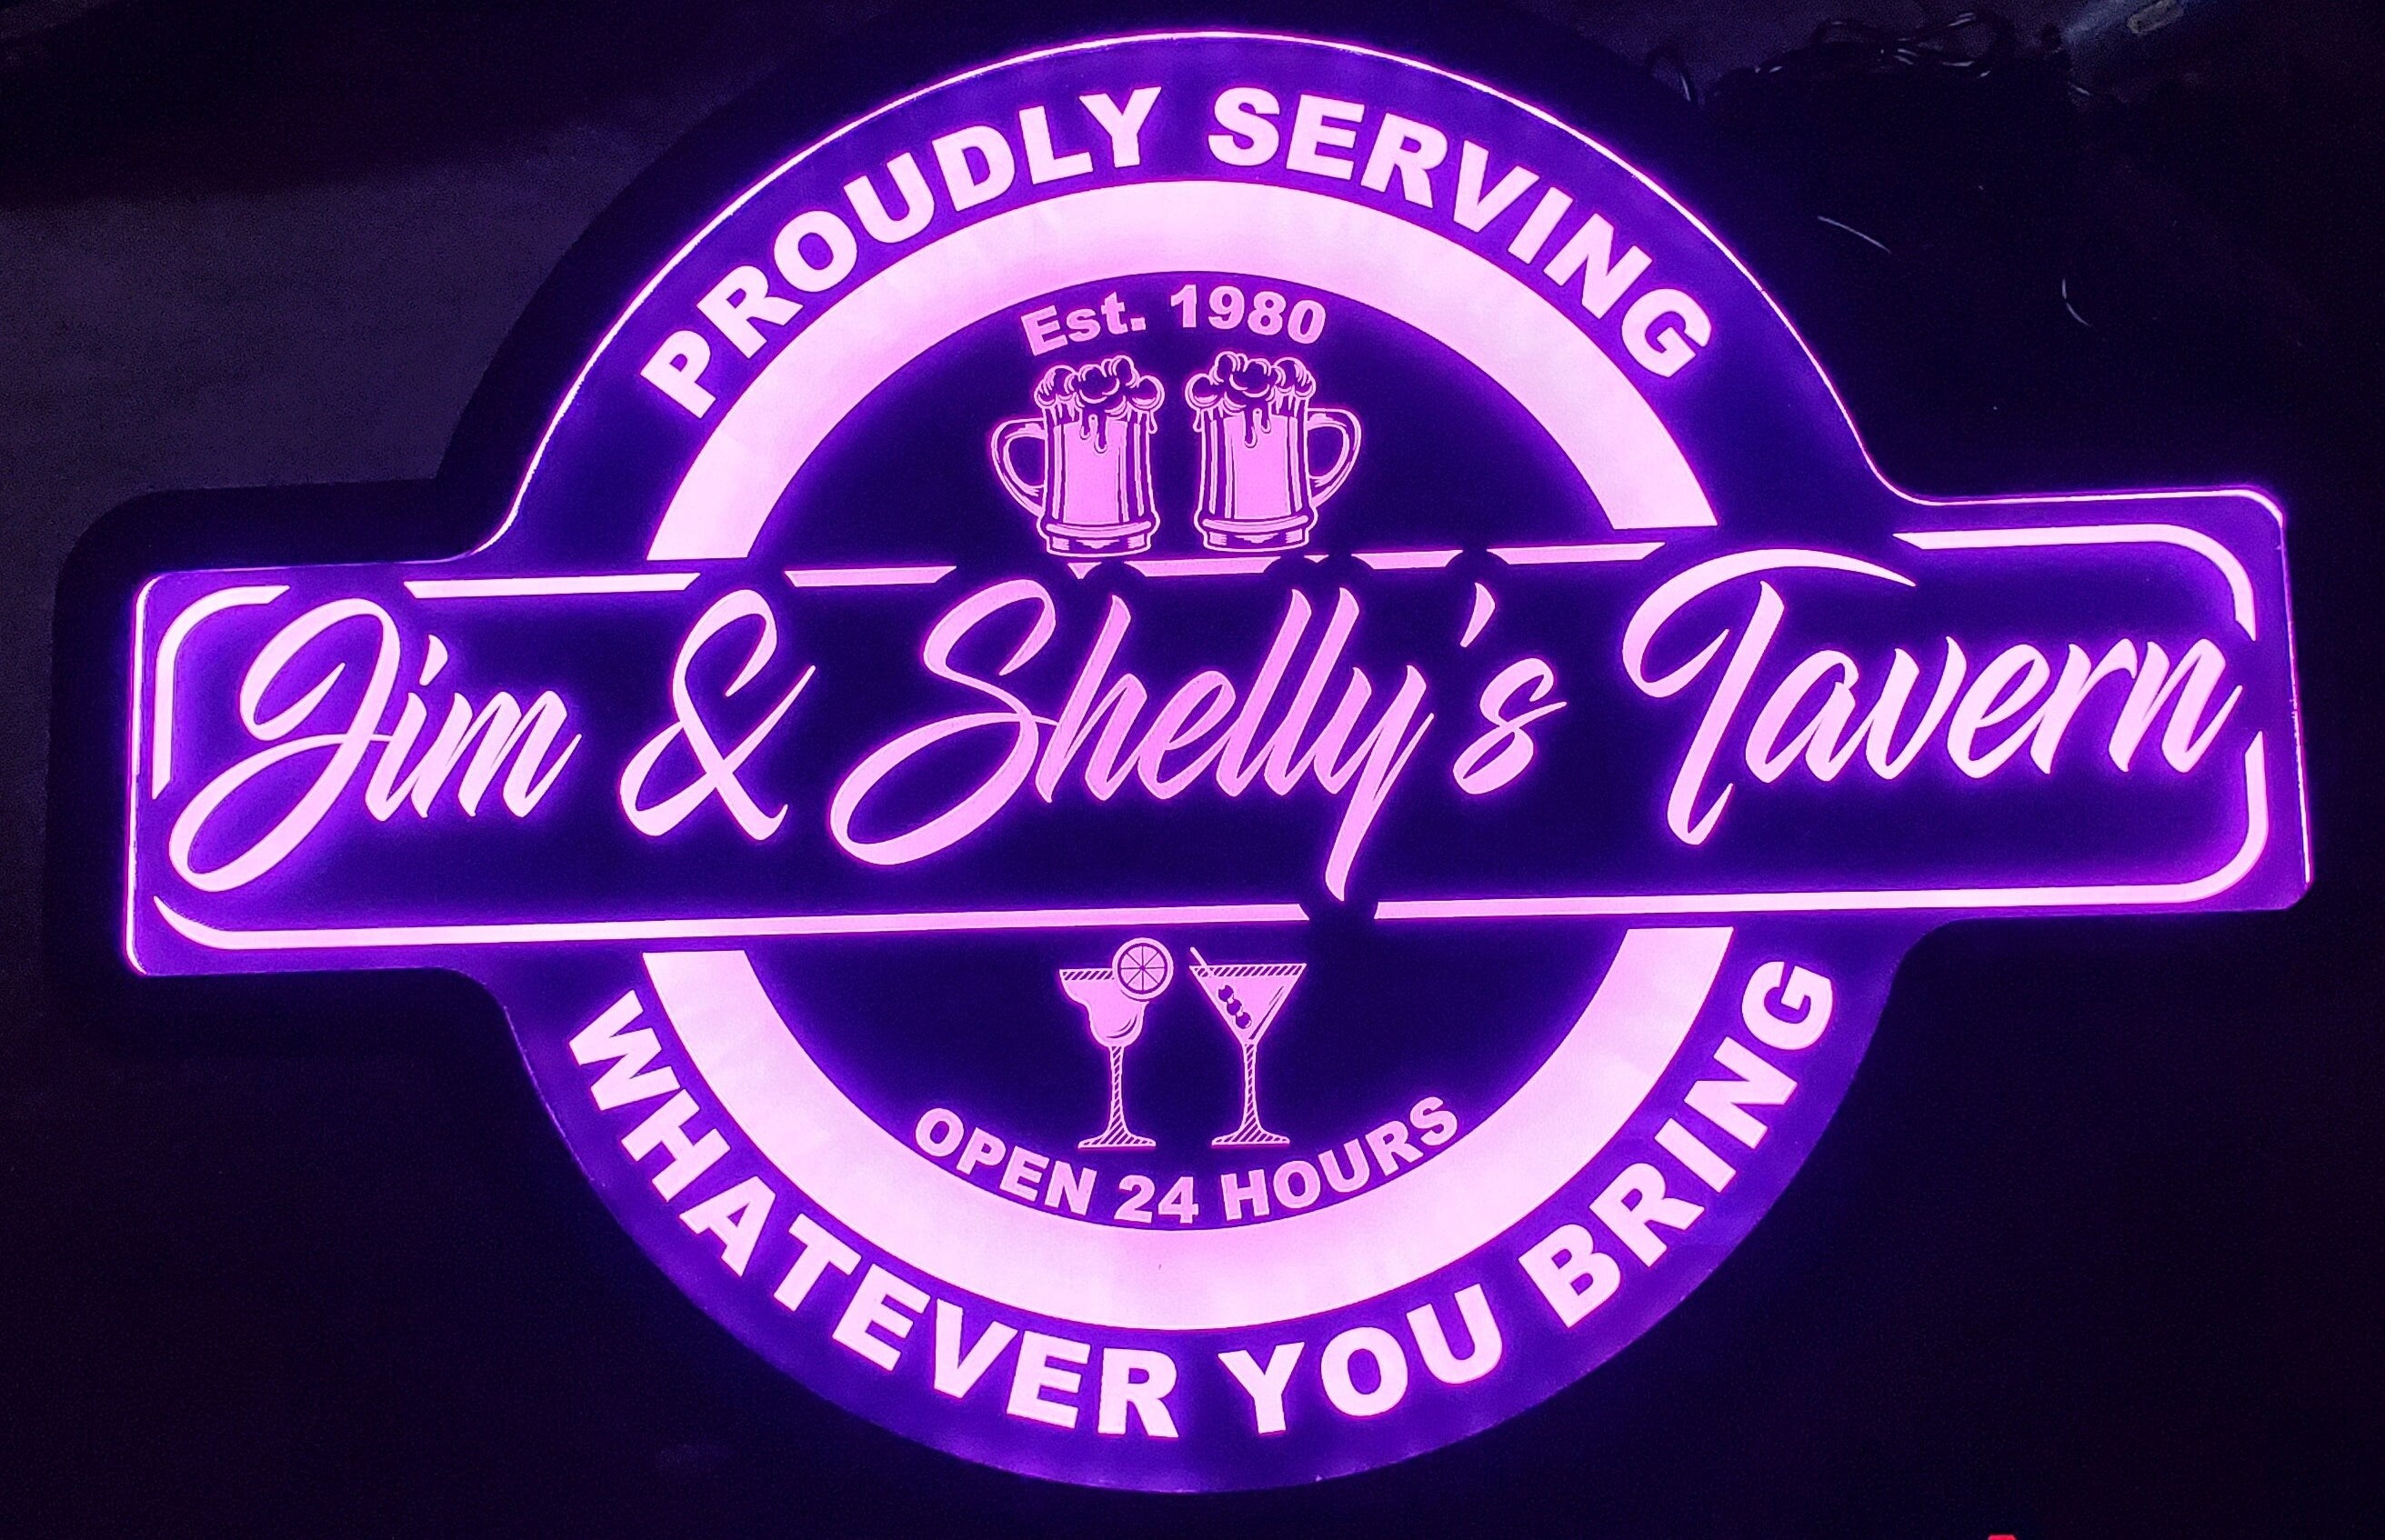 Custom Tavern or Bar Led Wall Sign Neon Like - Bar Sign - Neon Sign - Color Changing Remote Control - 4 Sizes Free Shipping